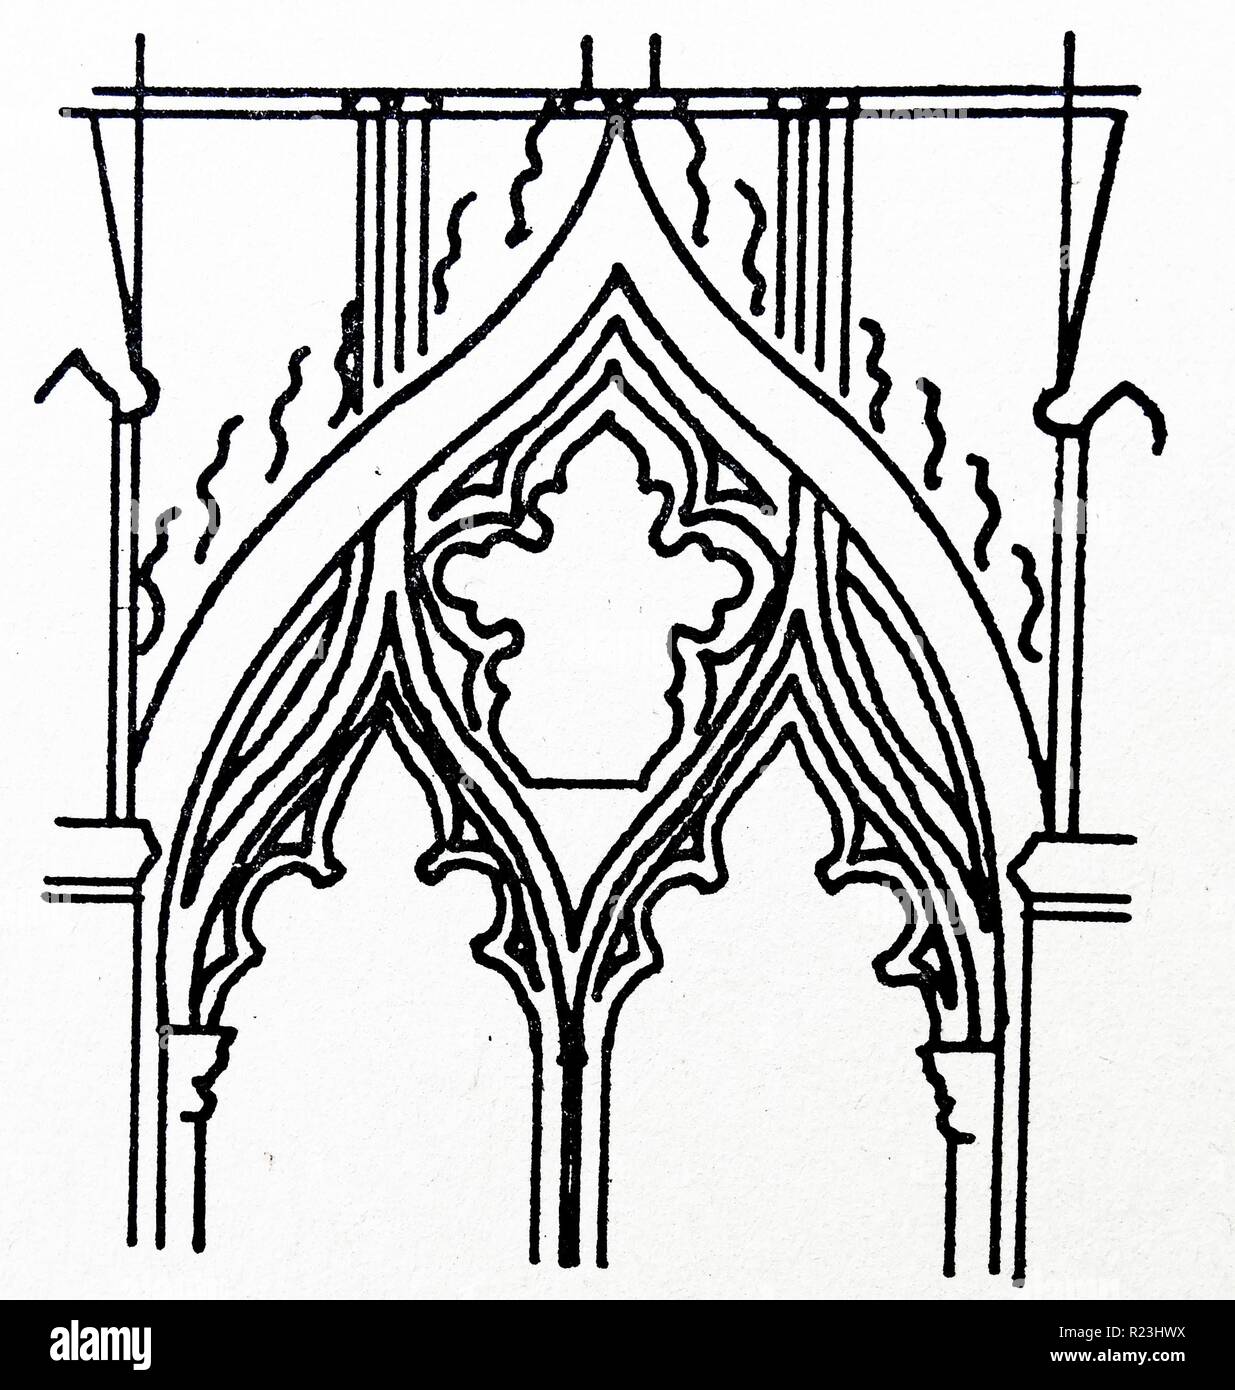 Sketch of the Lady Chapel of Ely Cathedral. Ely Cathedral is the principal church of the Diocese of Ely, in Cambridgeshire, England, and is the seat of the Bishop of Ely and a suffrage bishop, the Bishop of Huntingdon. Dated 10th Century Stock Photo